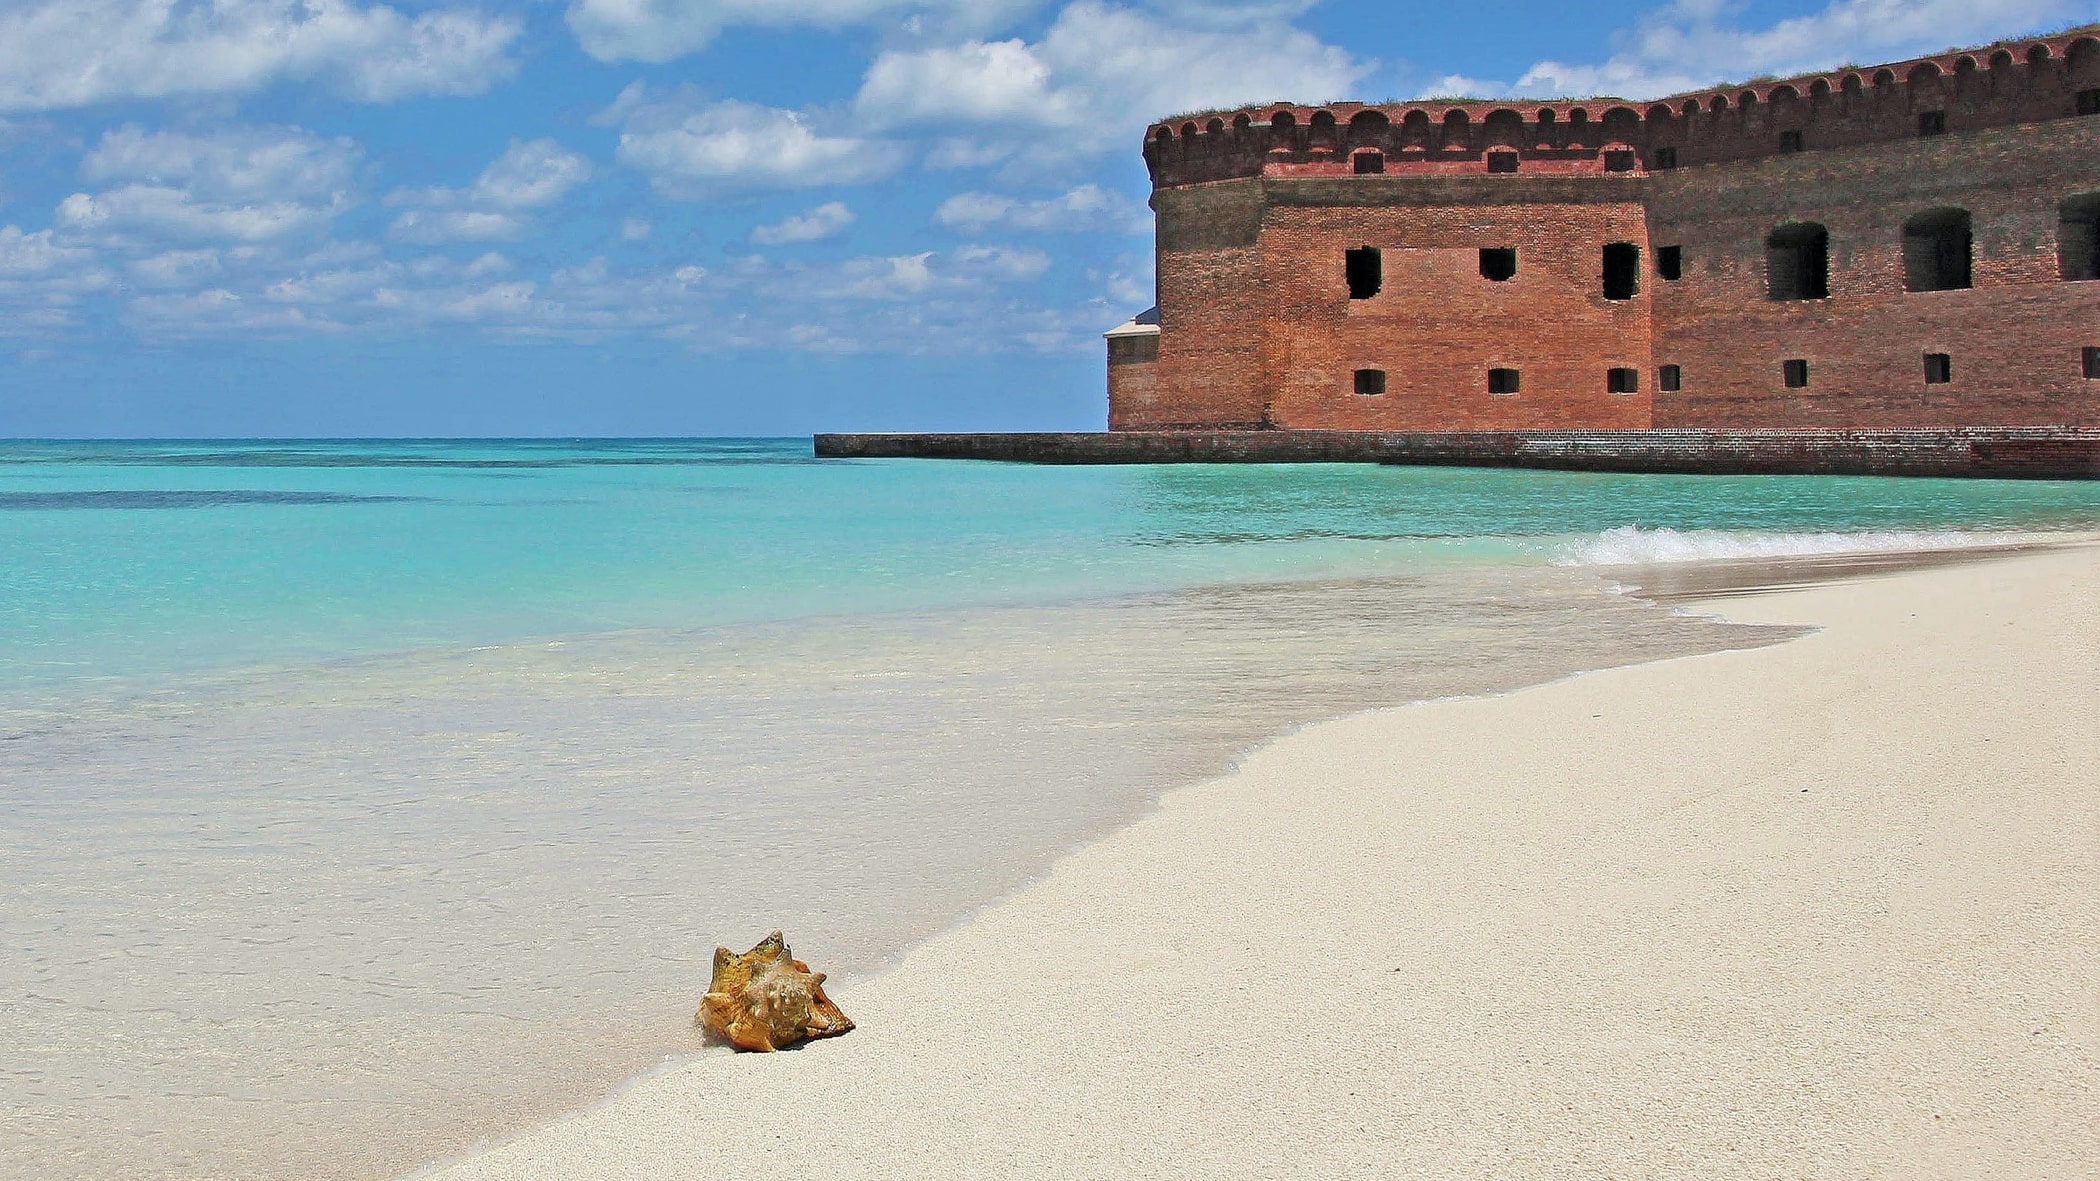 Visiting Fort Jefferson is one of the most fun things to do in Florida